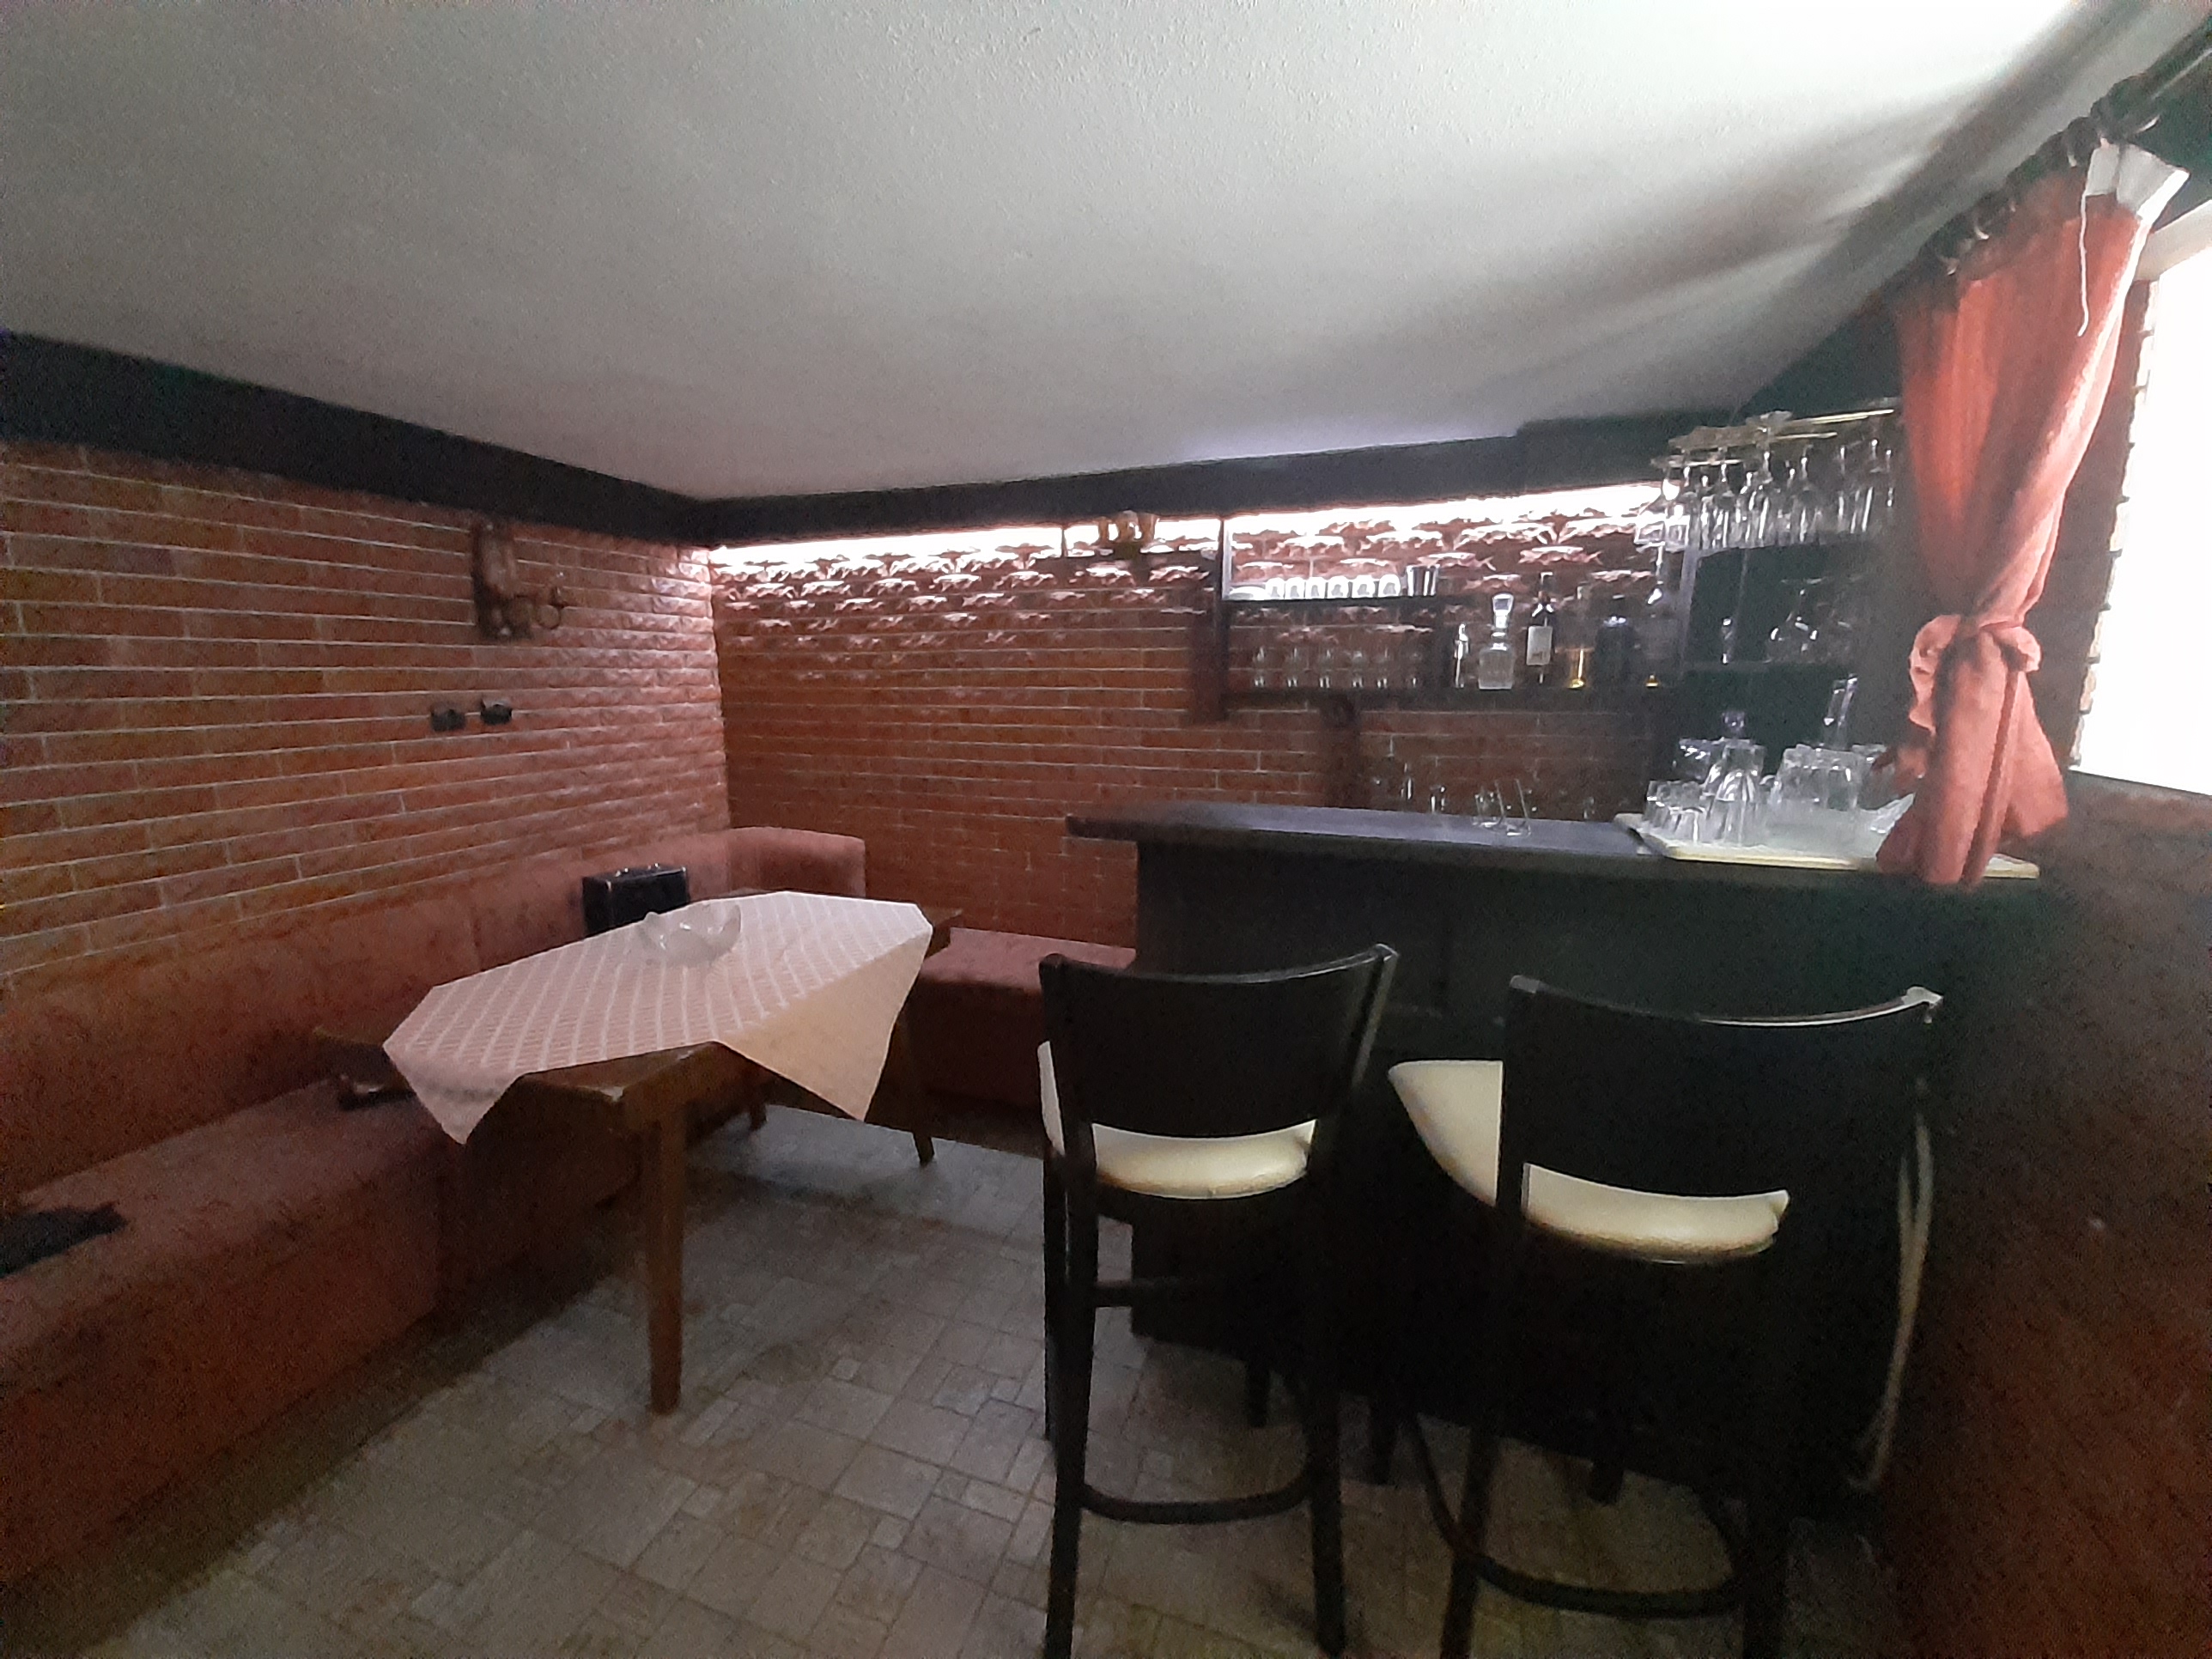 For sale in Bansko: Gasified massive three-story house with commercial premises